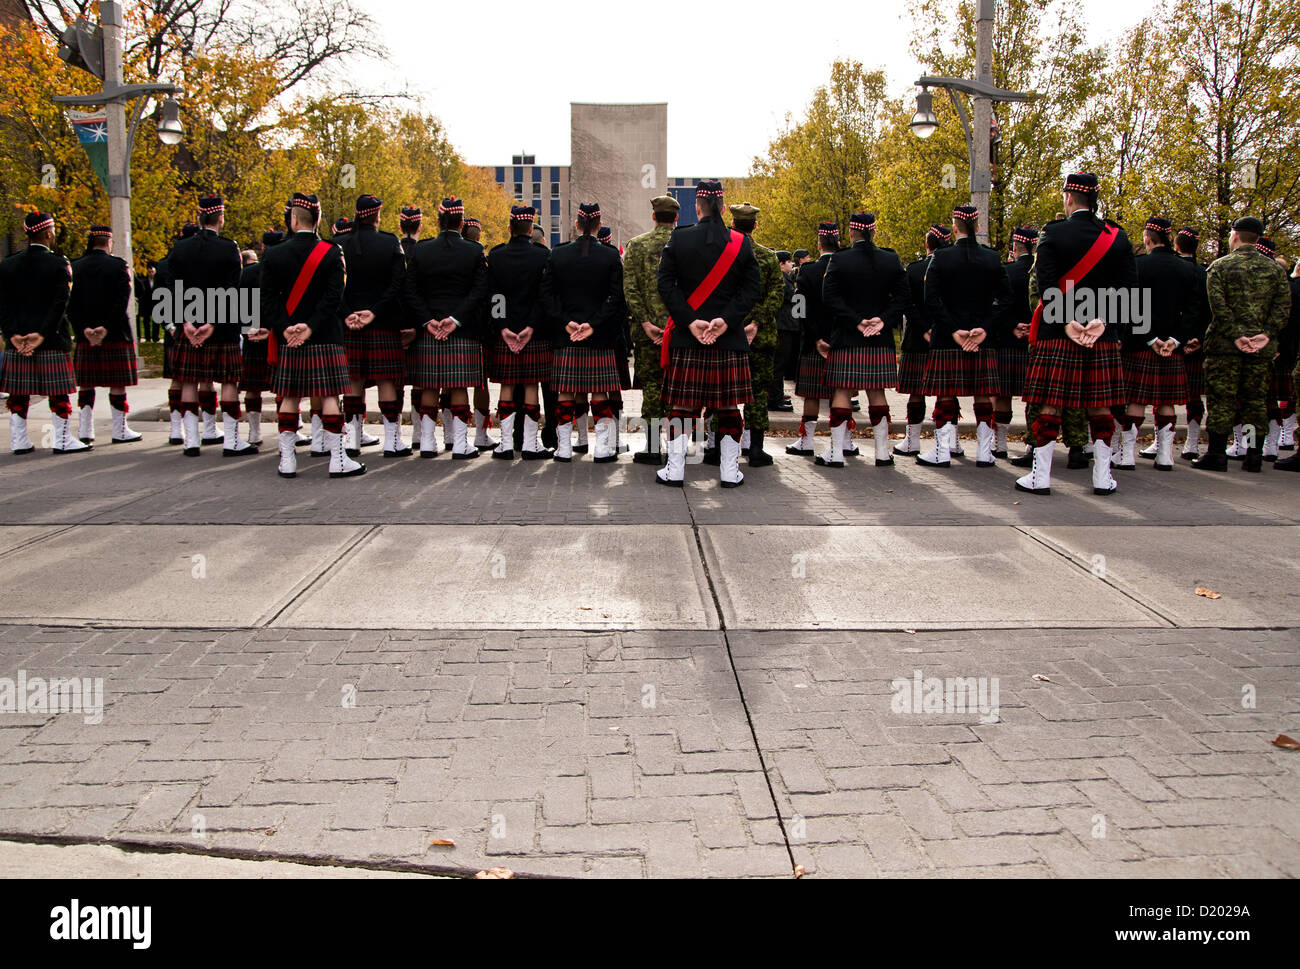 I crowd of uniformed soldiers in kilt's during a Remembrance Day ceremony in Windsor, Ontario, Canada. Stock Photo